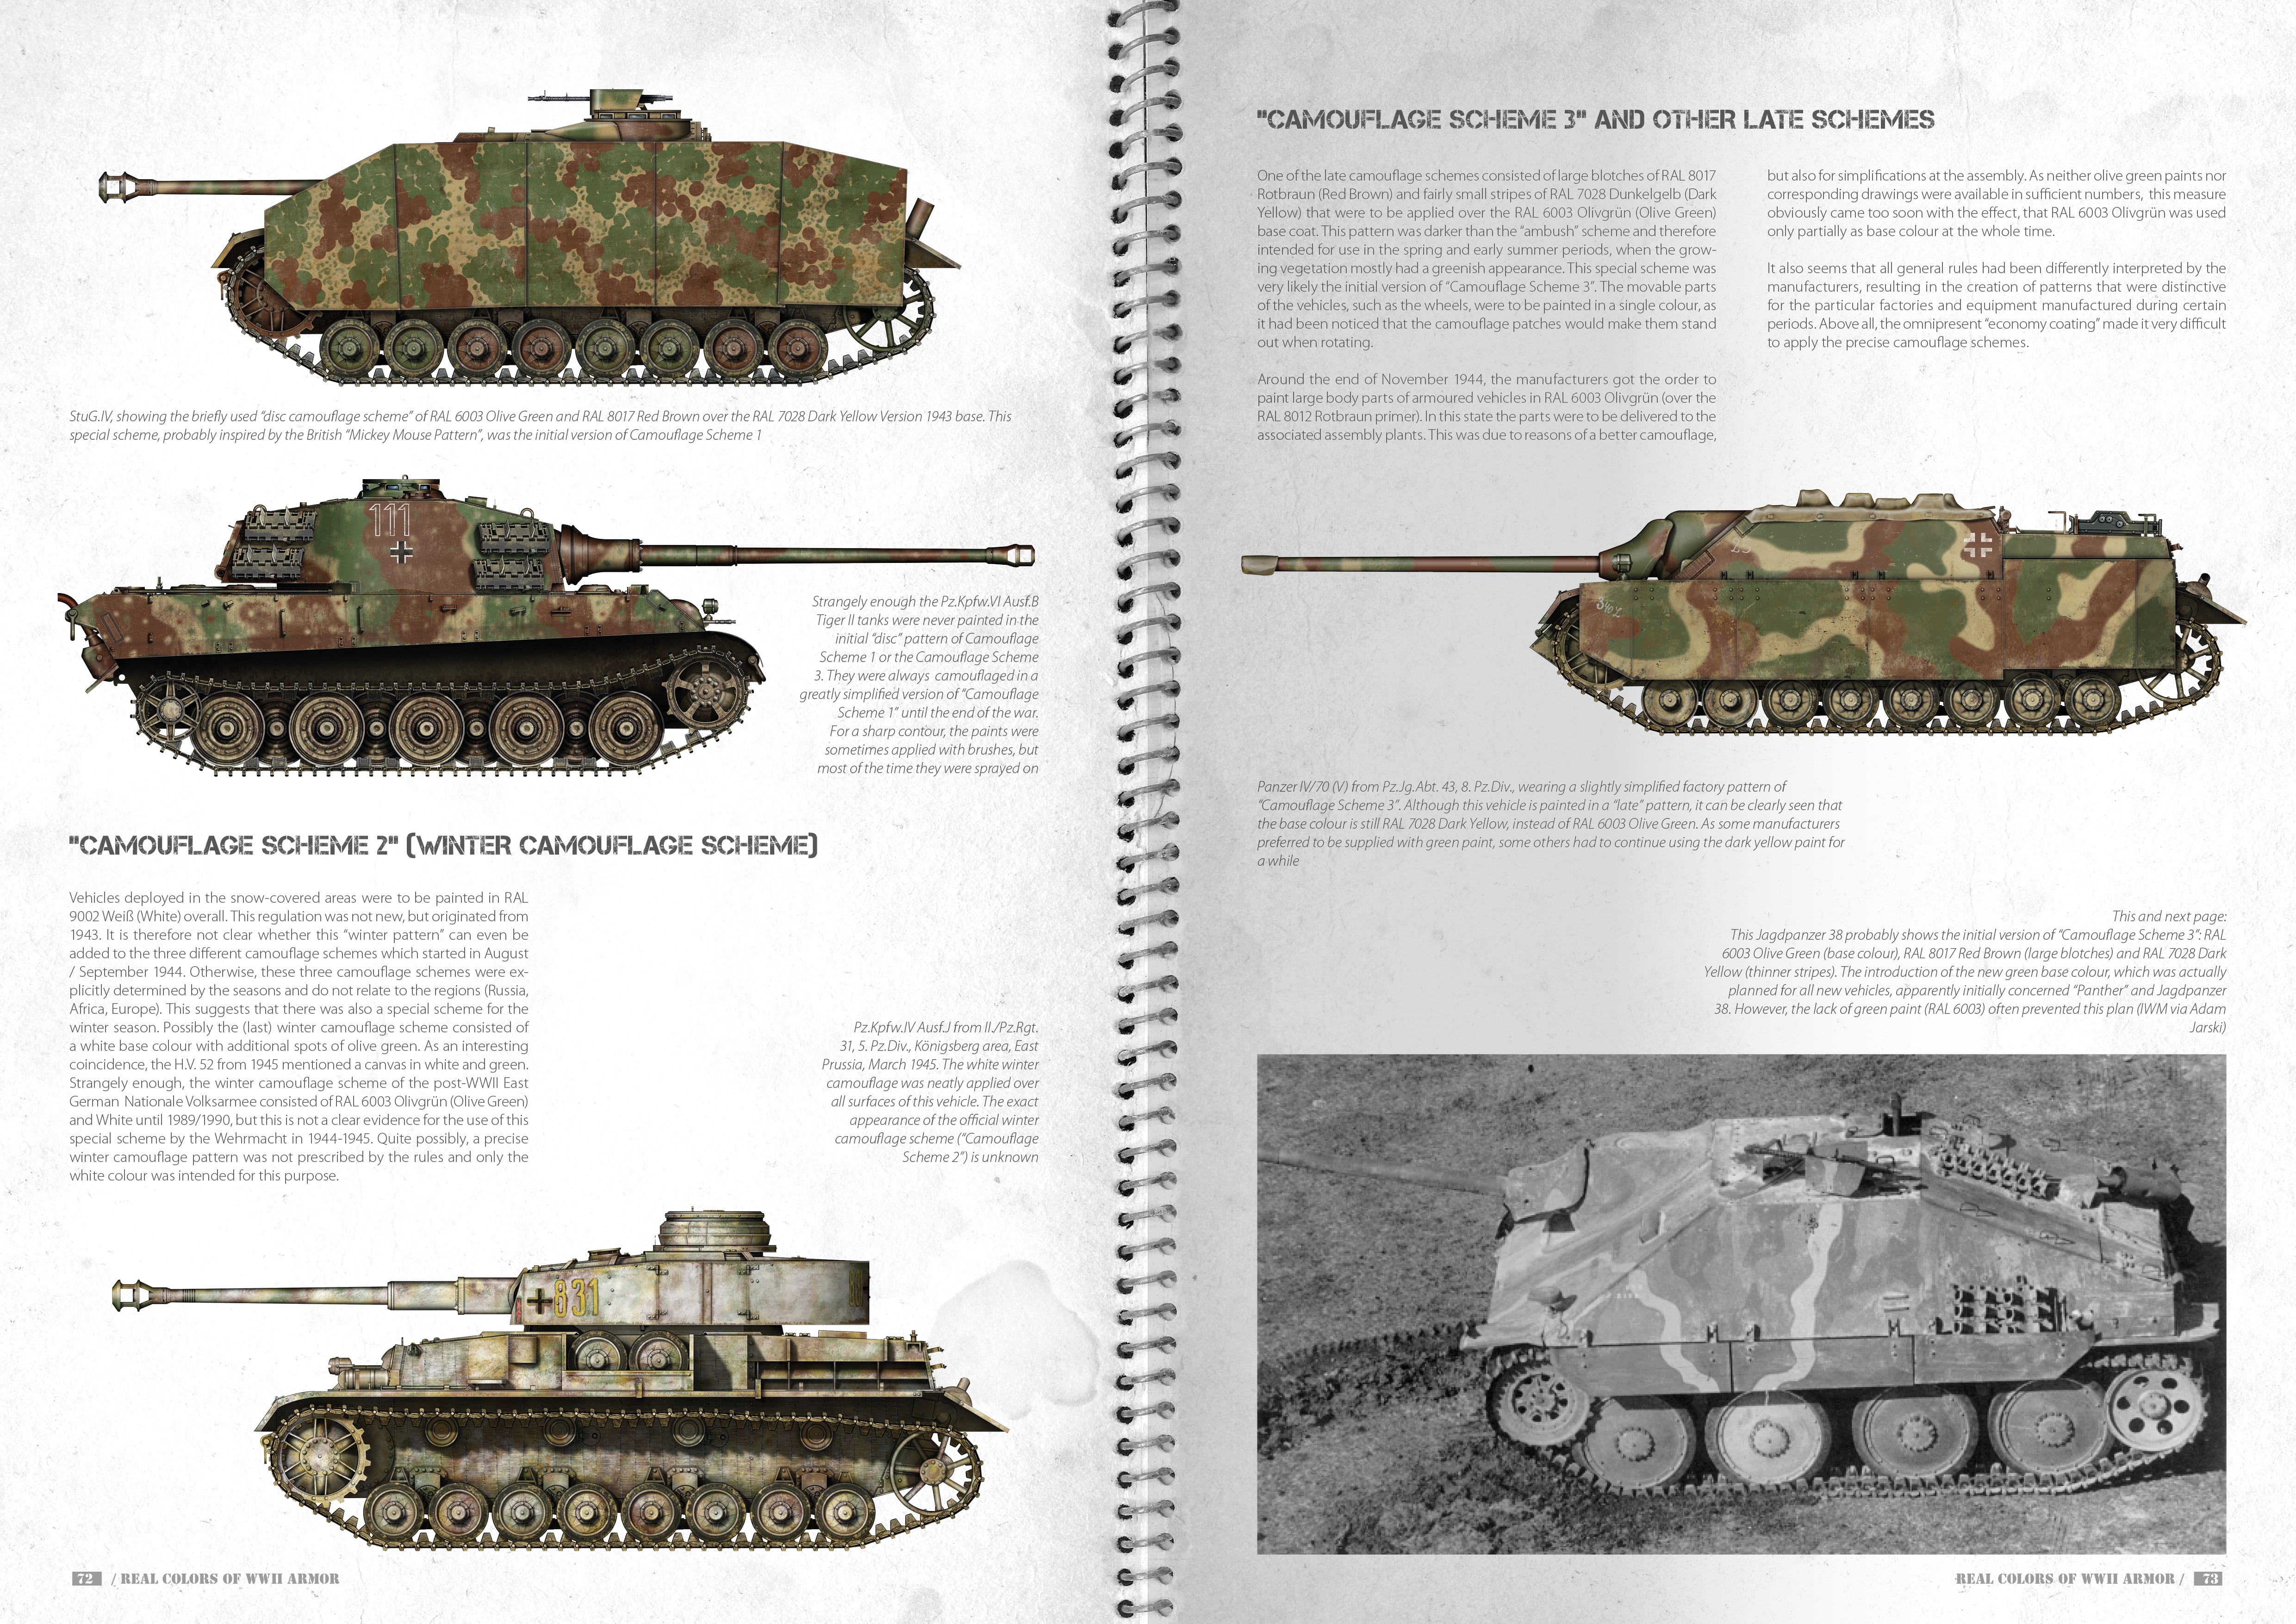 How did the bright colors of some World War II tank camouflages